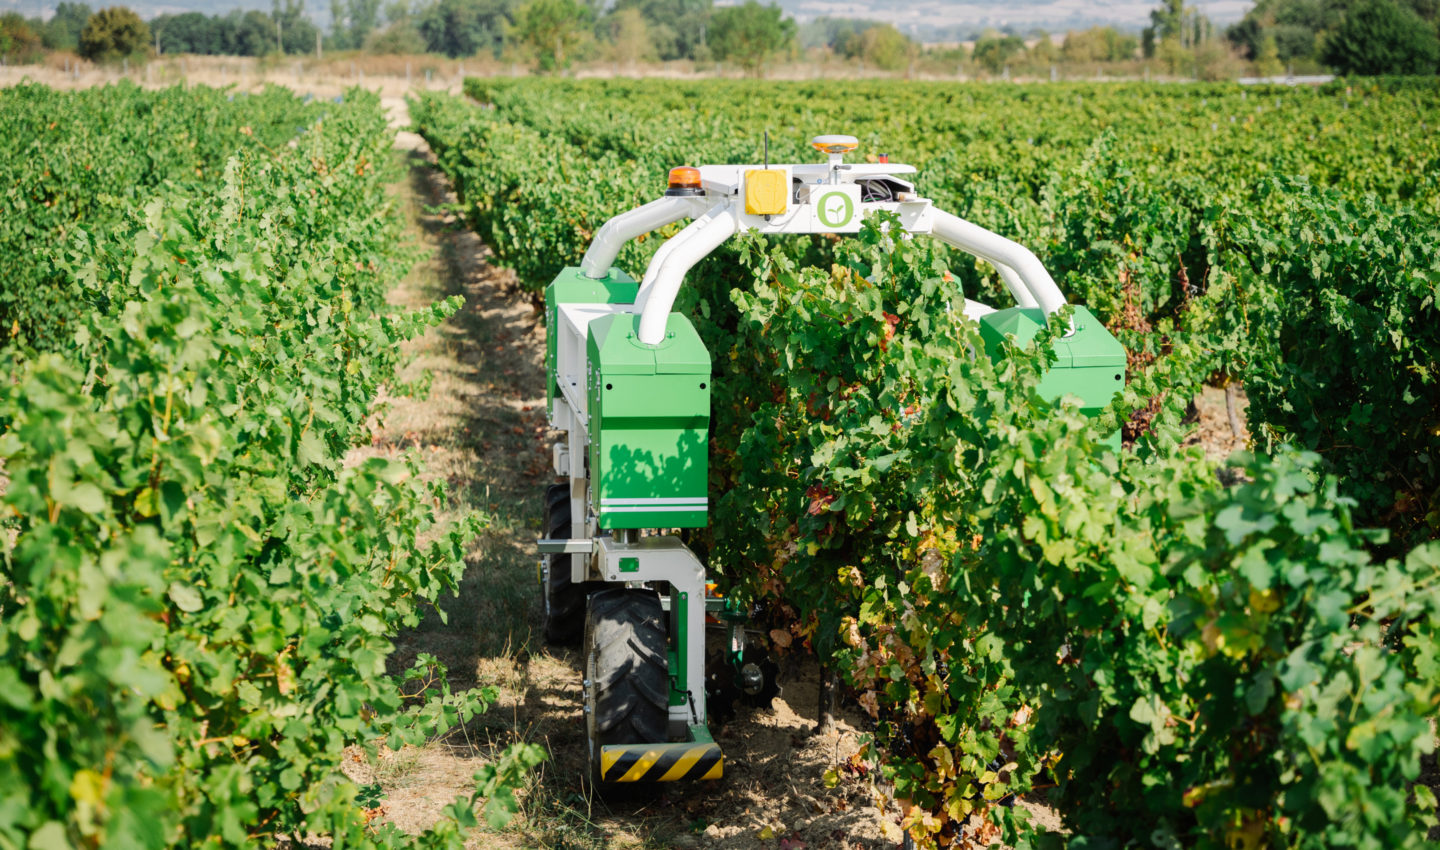 The robot Ted moves autonomously between the rows and performs a precise weeding